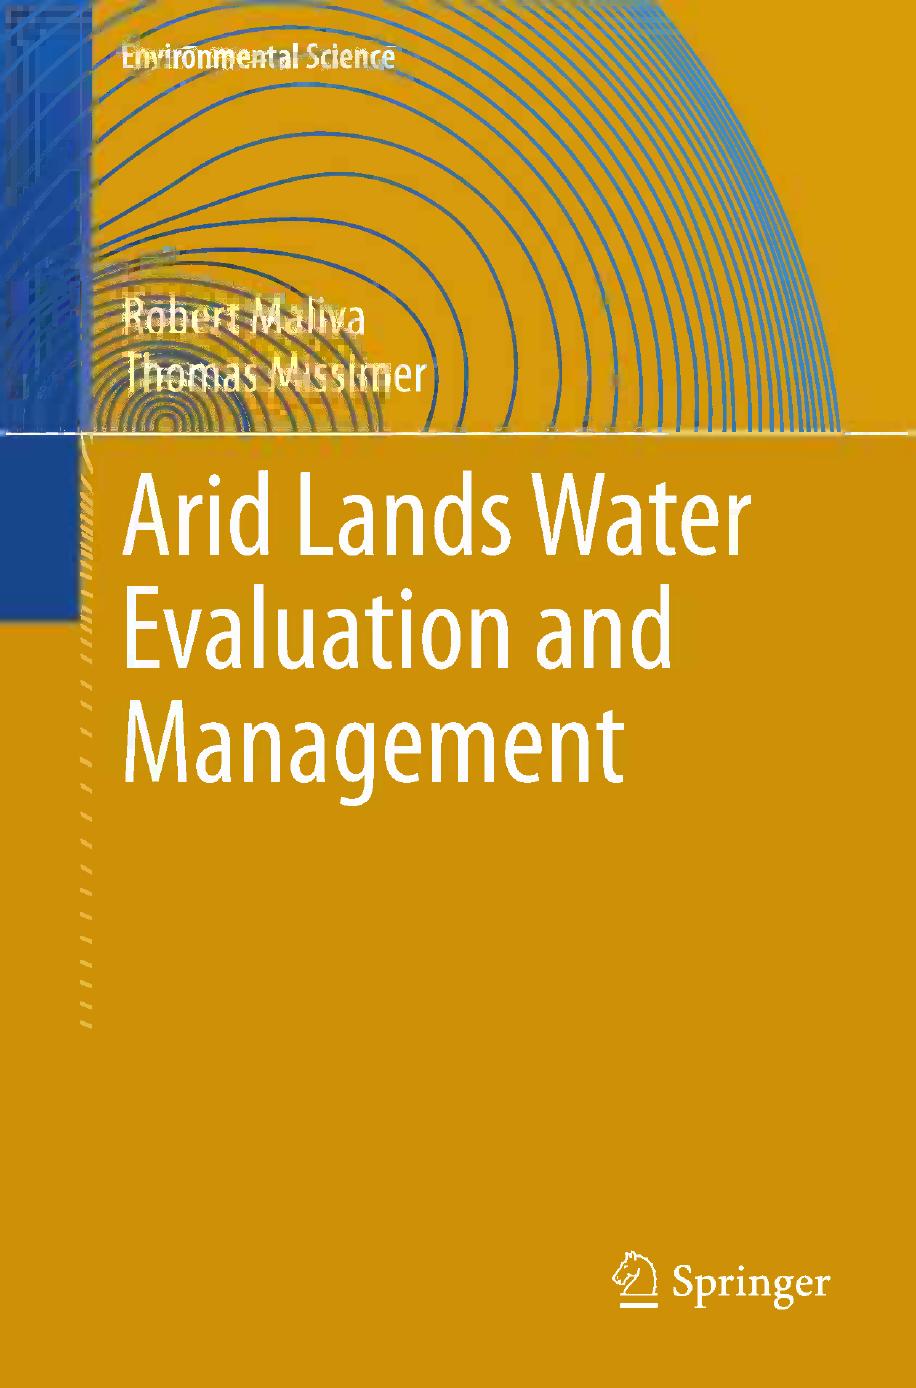 Arid Lands Water Evaluation and Management 2012